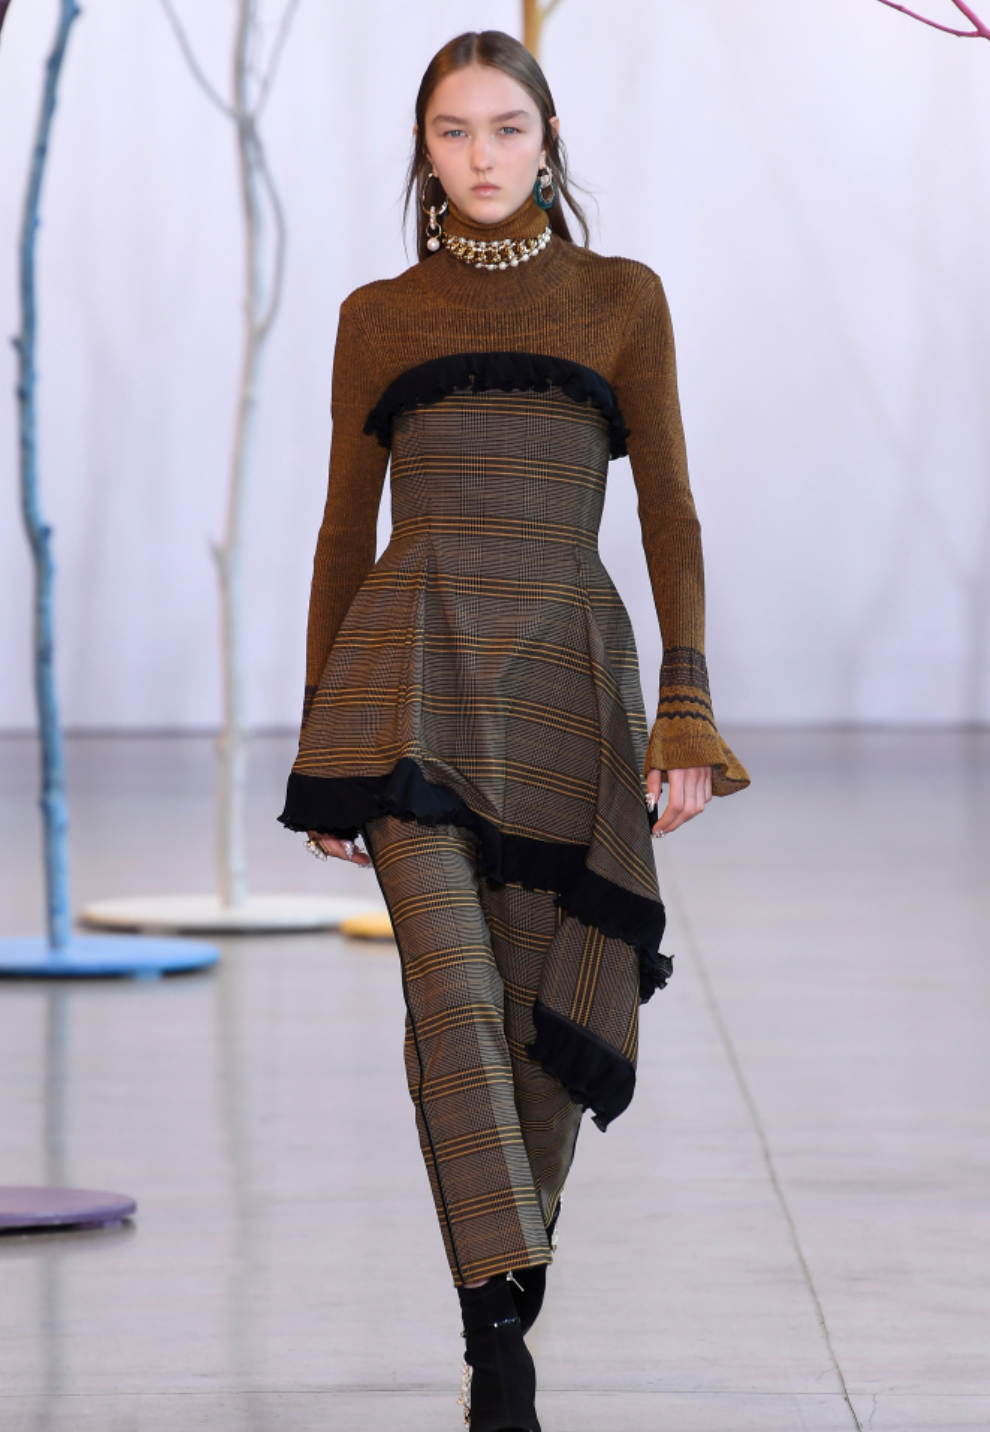 NYFW: TRENDS FOR FALL '19